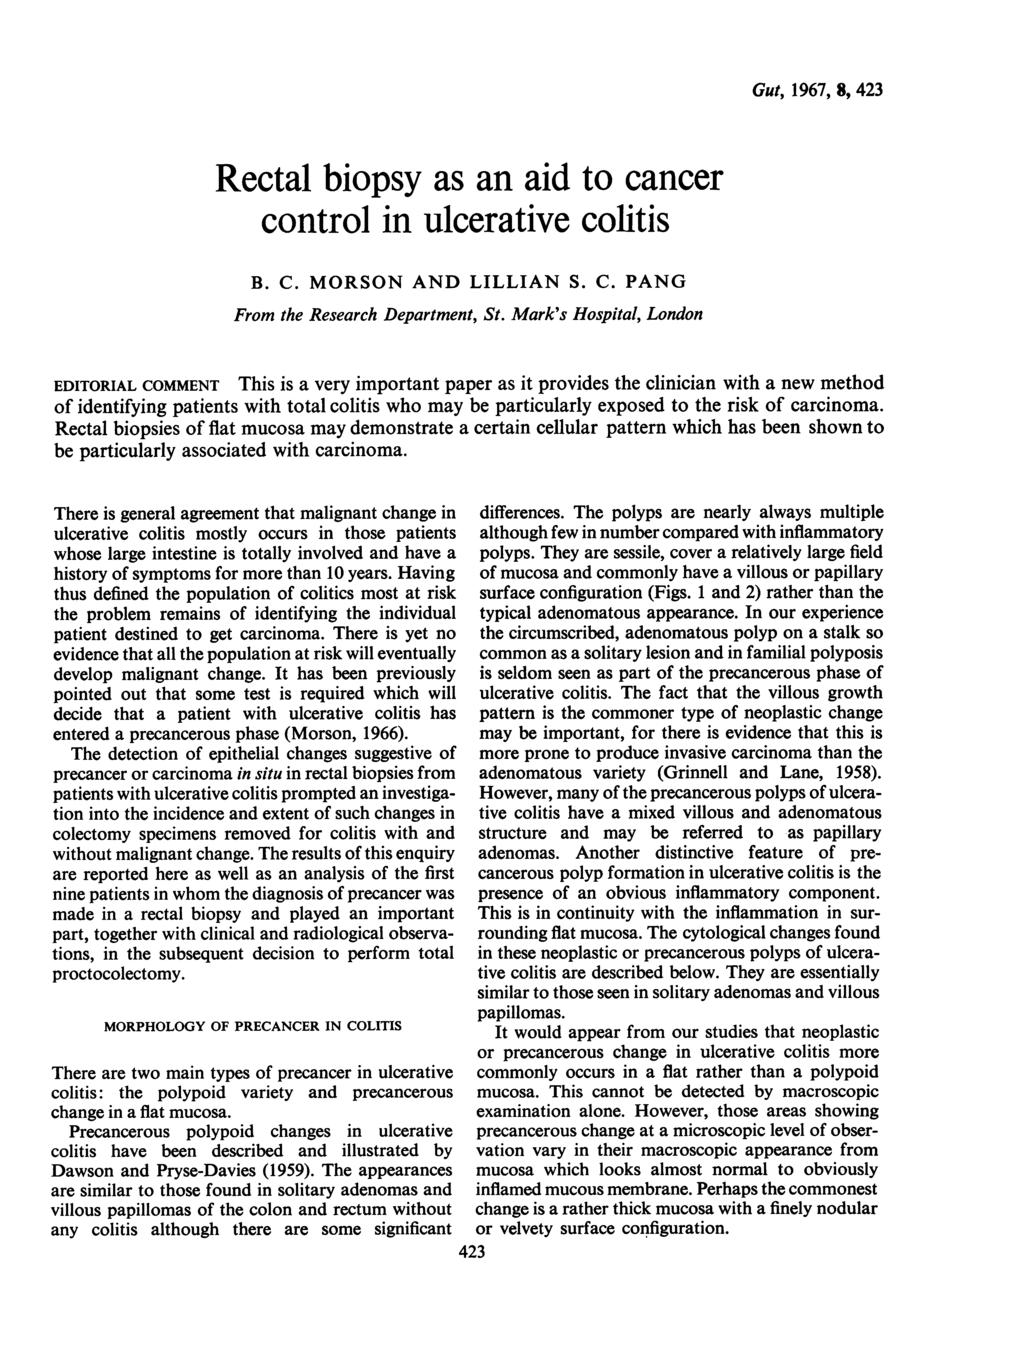 Rectal biopsy as an aid to cancer control in ulcerative colitis B. C. MORSON AND LILLIAN S. C. PANG From the Research Department, St.